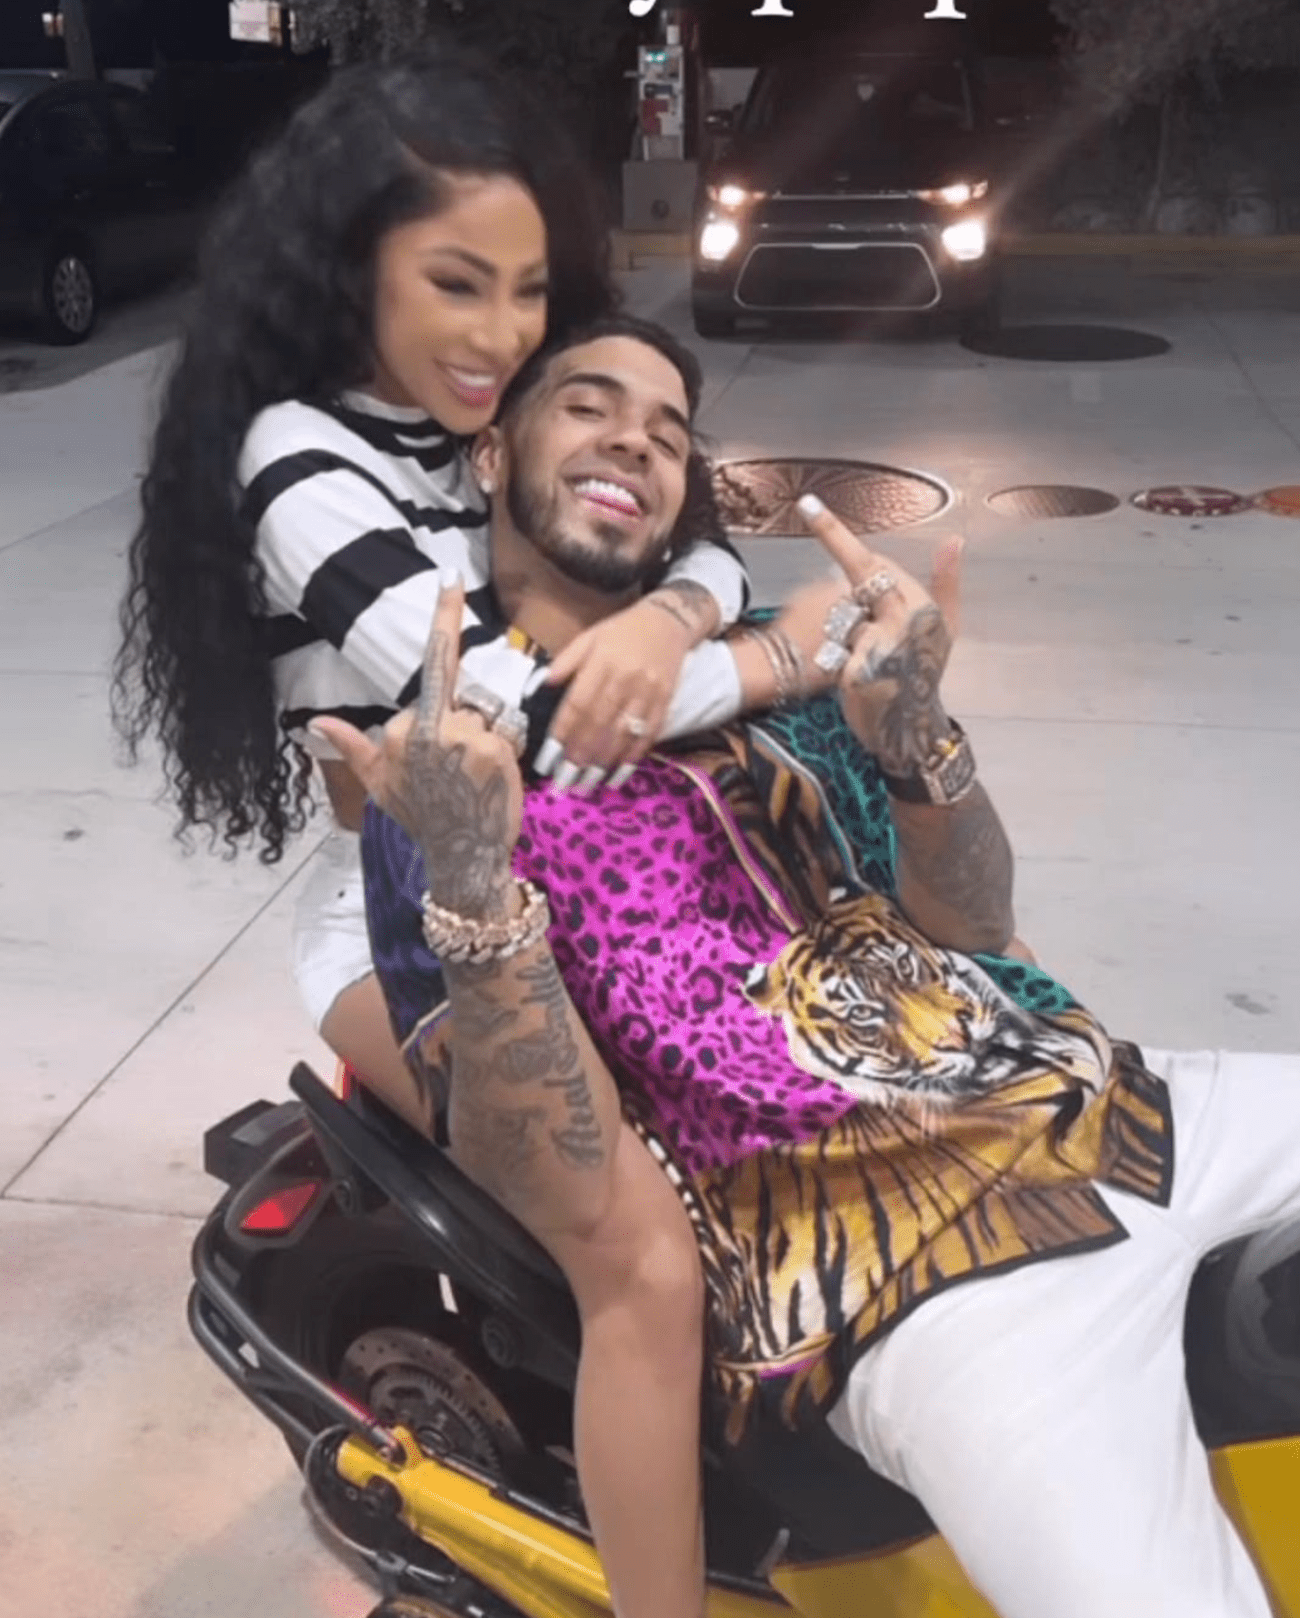 Anuel sends a beautiful bouquet of roses to Yailin